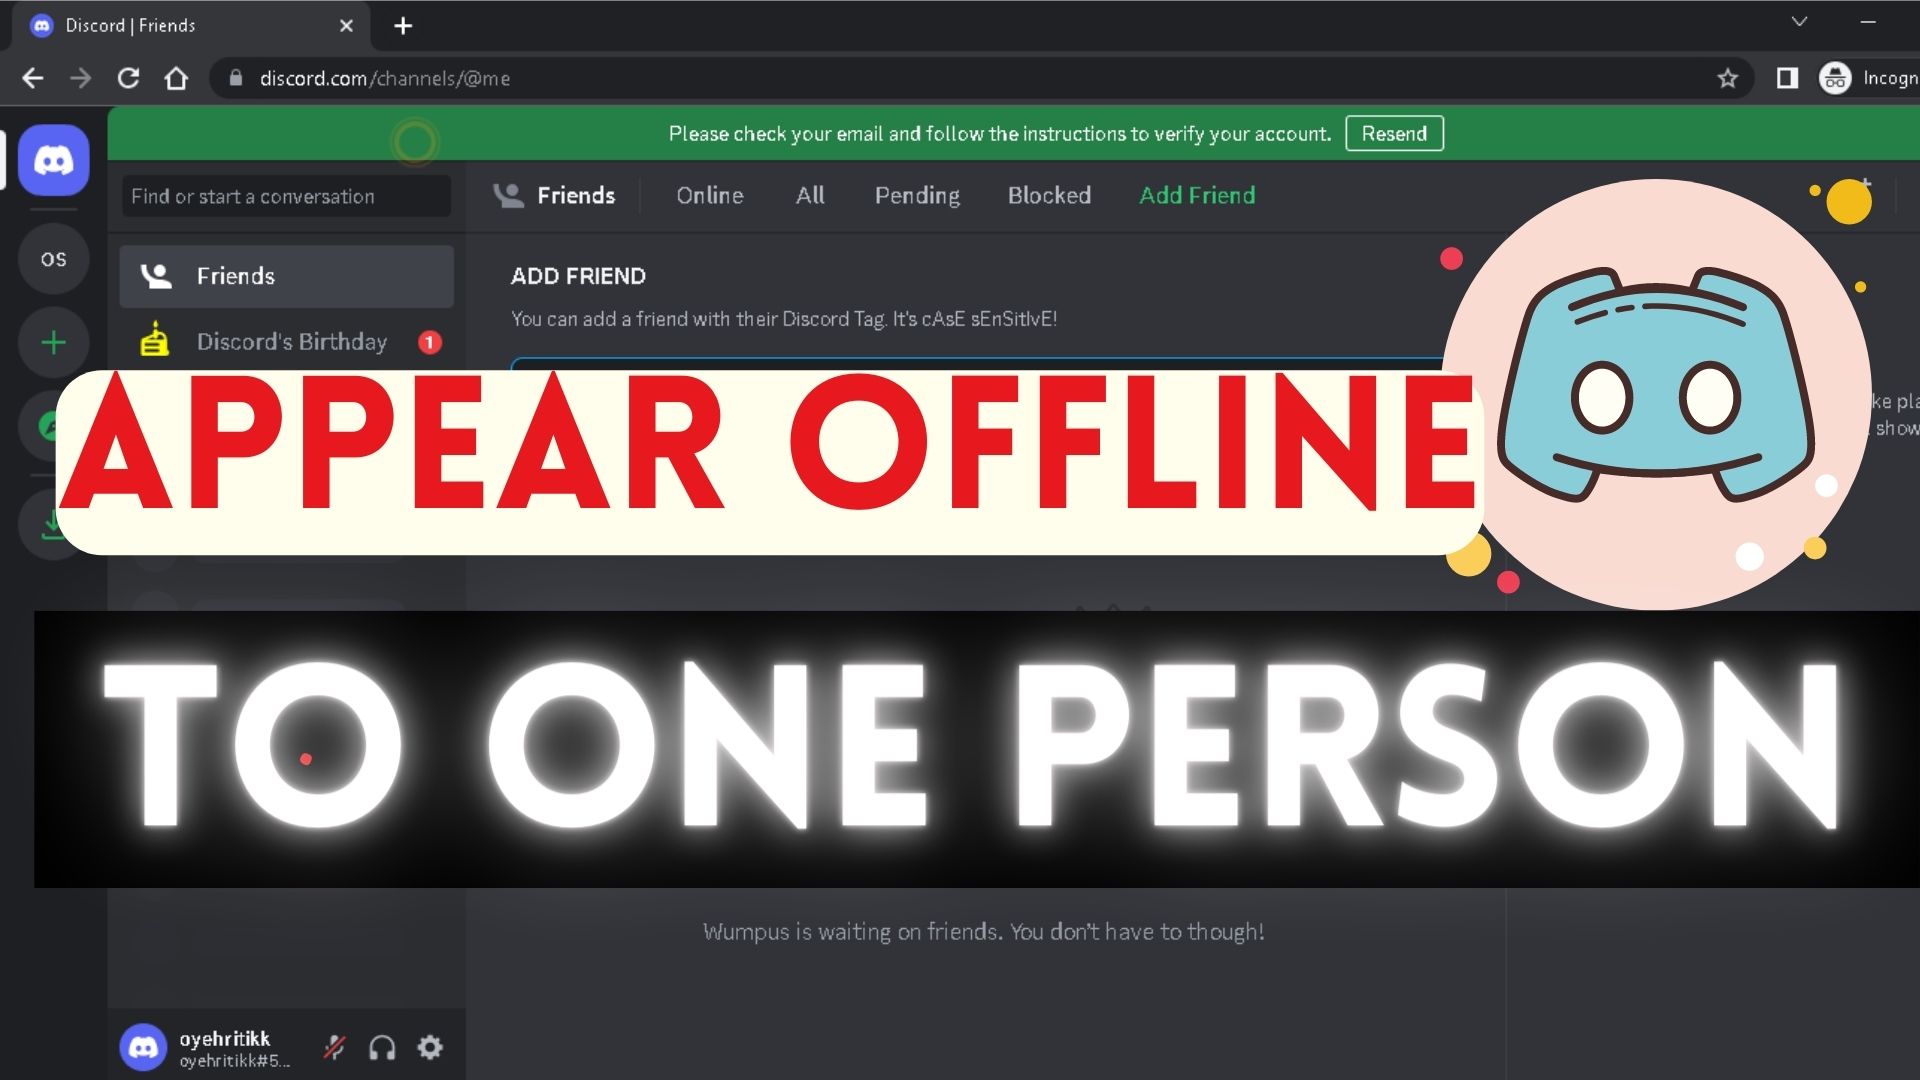 appear offline to one person in discord